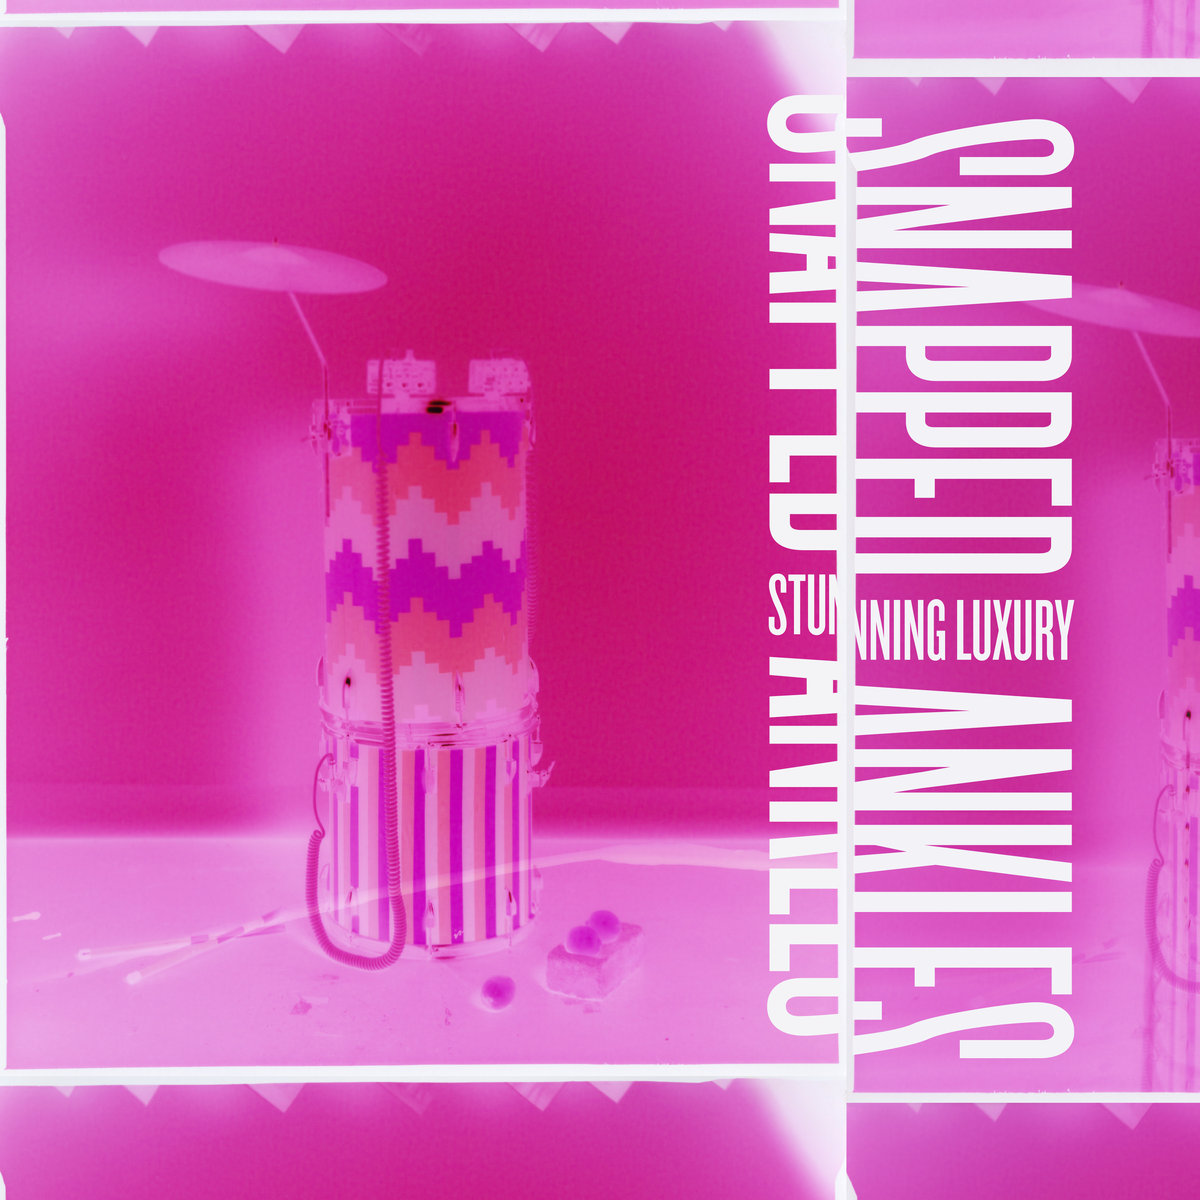 Snapped Ankles – Stunning Luxury (2019) [FLAC 24bit/96kHz]